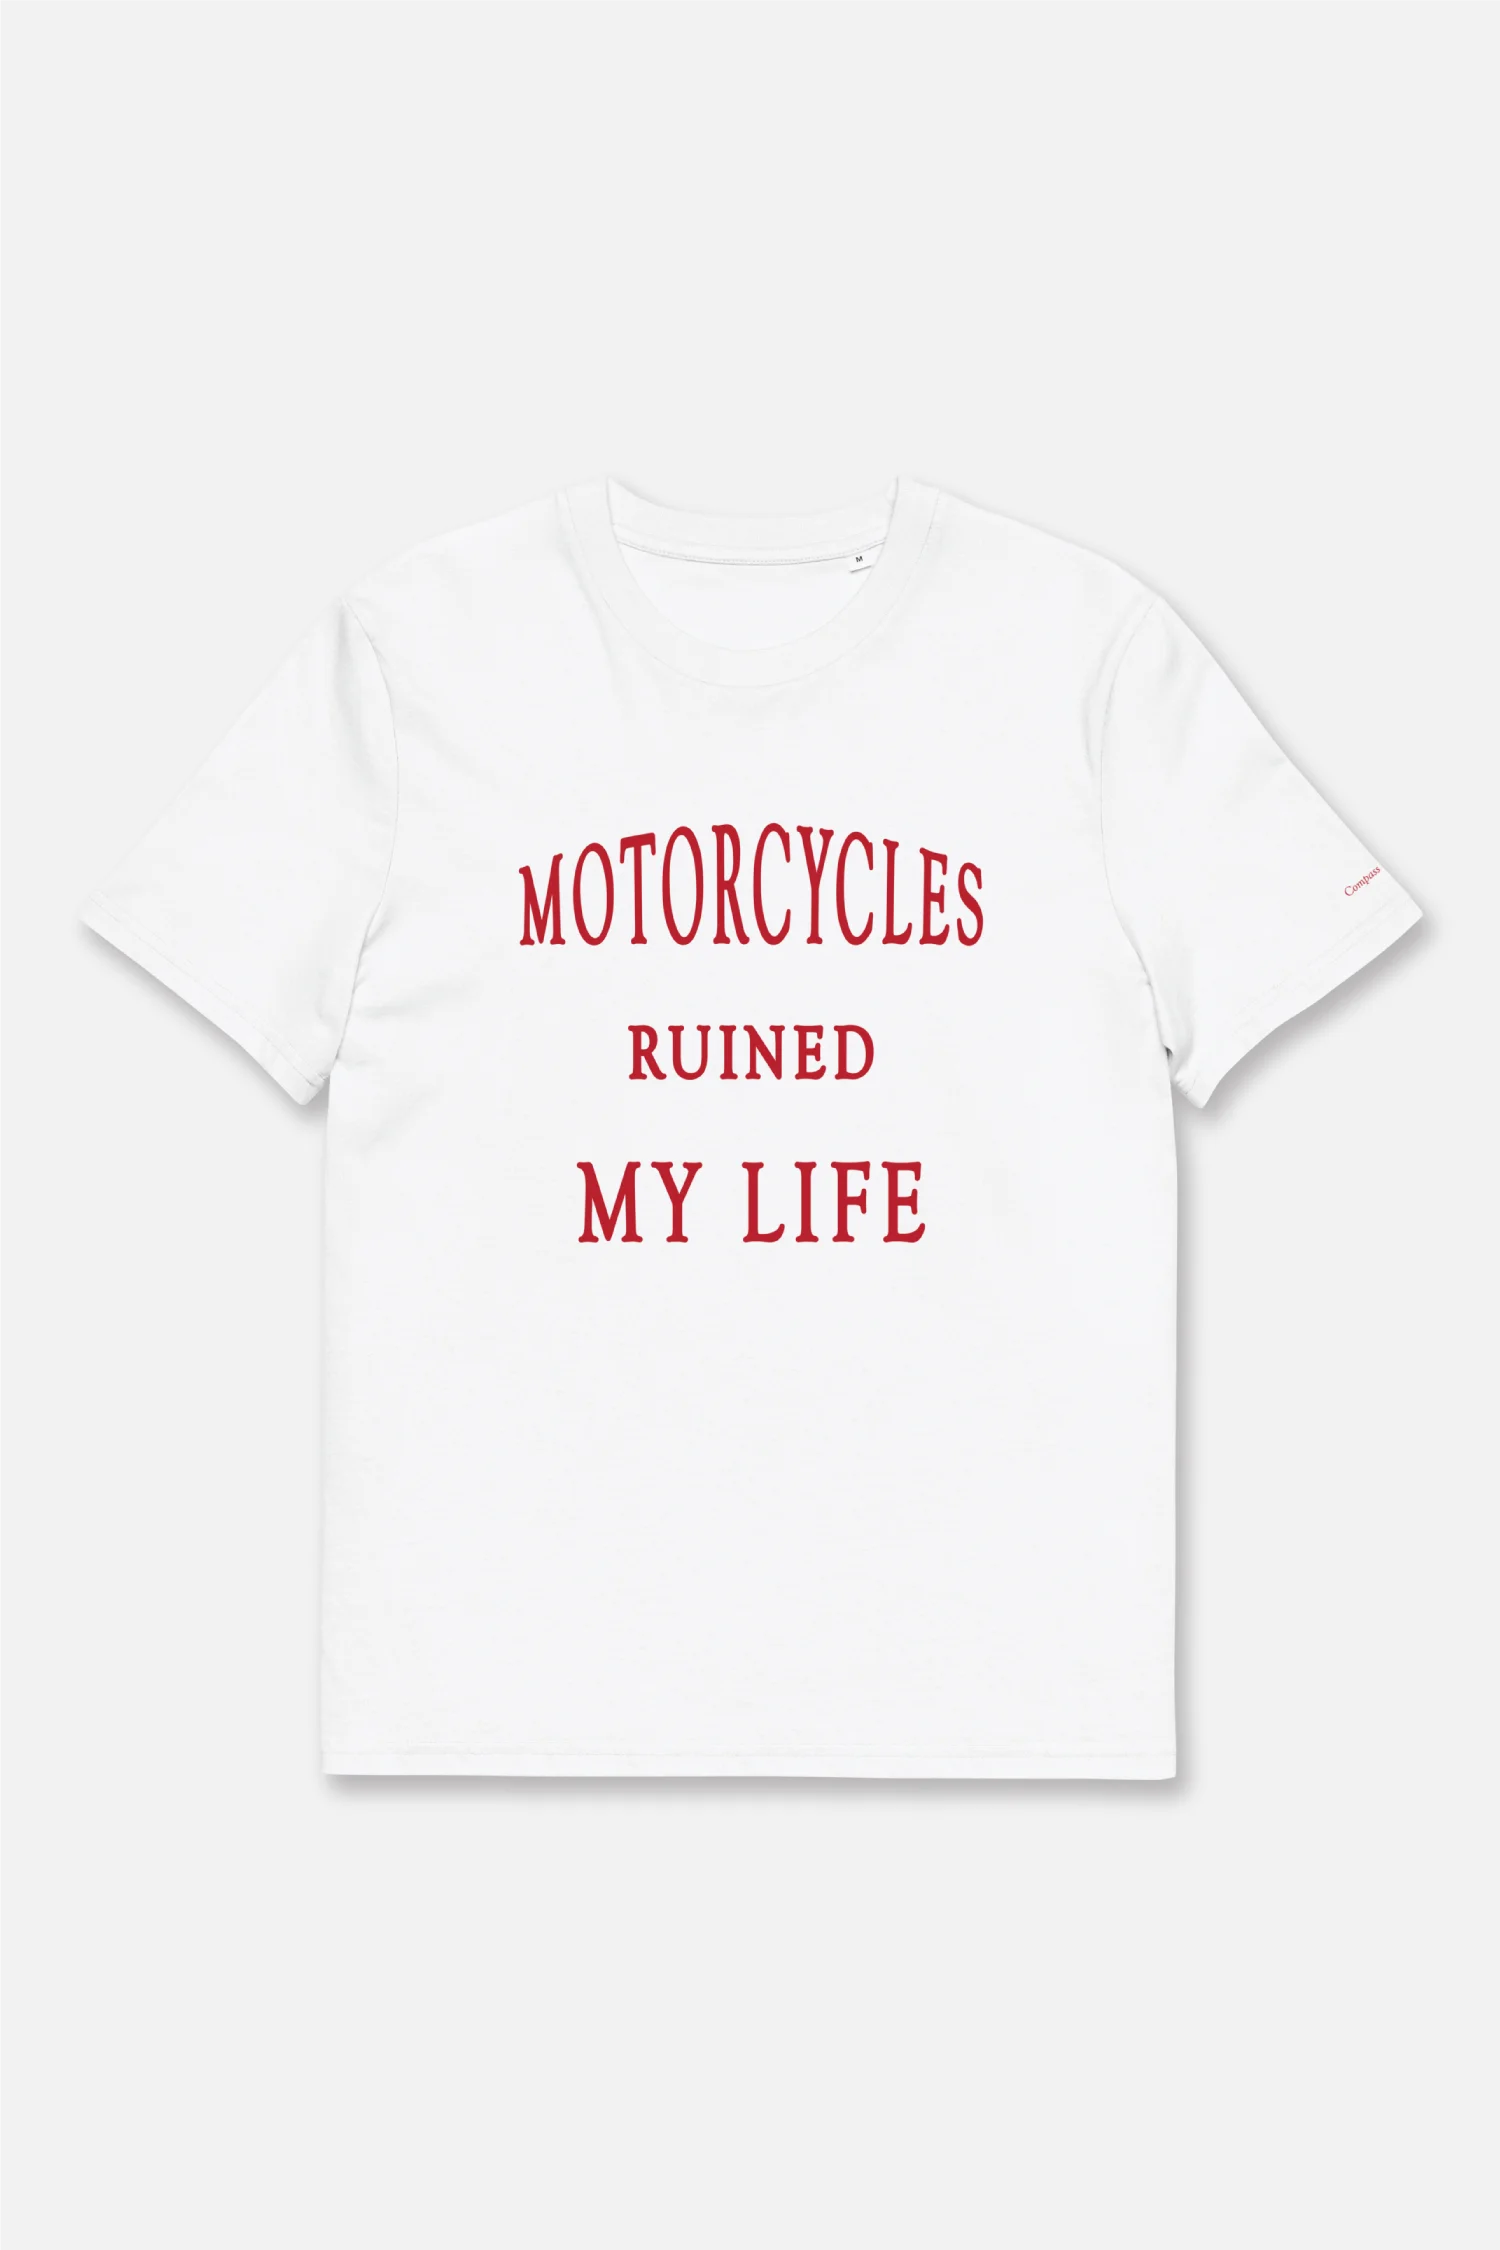 Motorcycles Ruined My Life